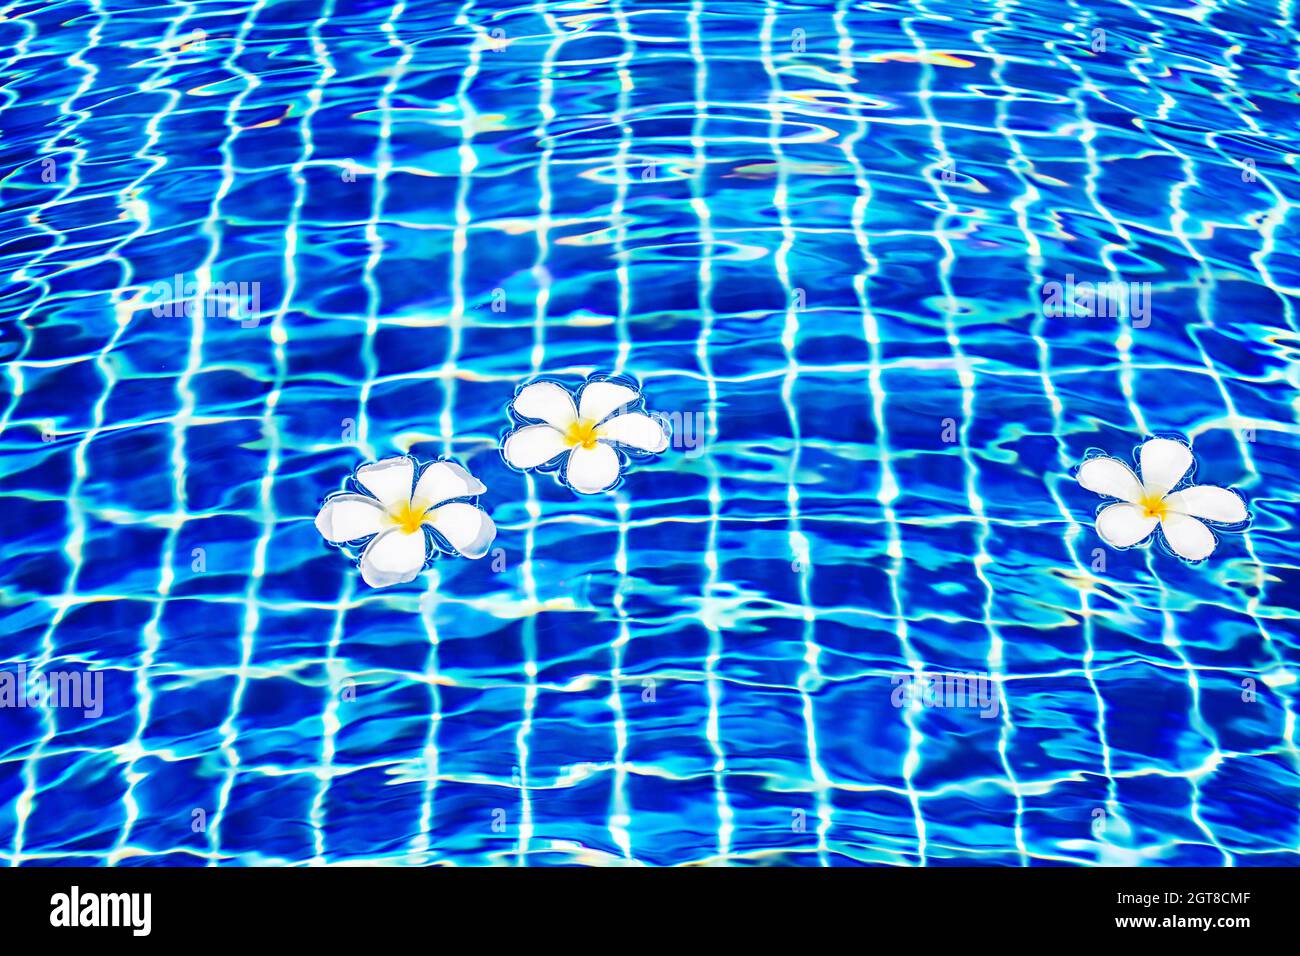 Swimming pool blue water surface background, floating white plumeria frangipani flowers, poolside, tropical sea beach nature, summer holidays vacation Stock Photo